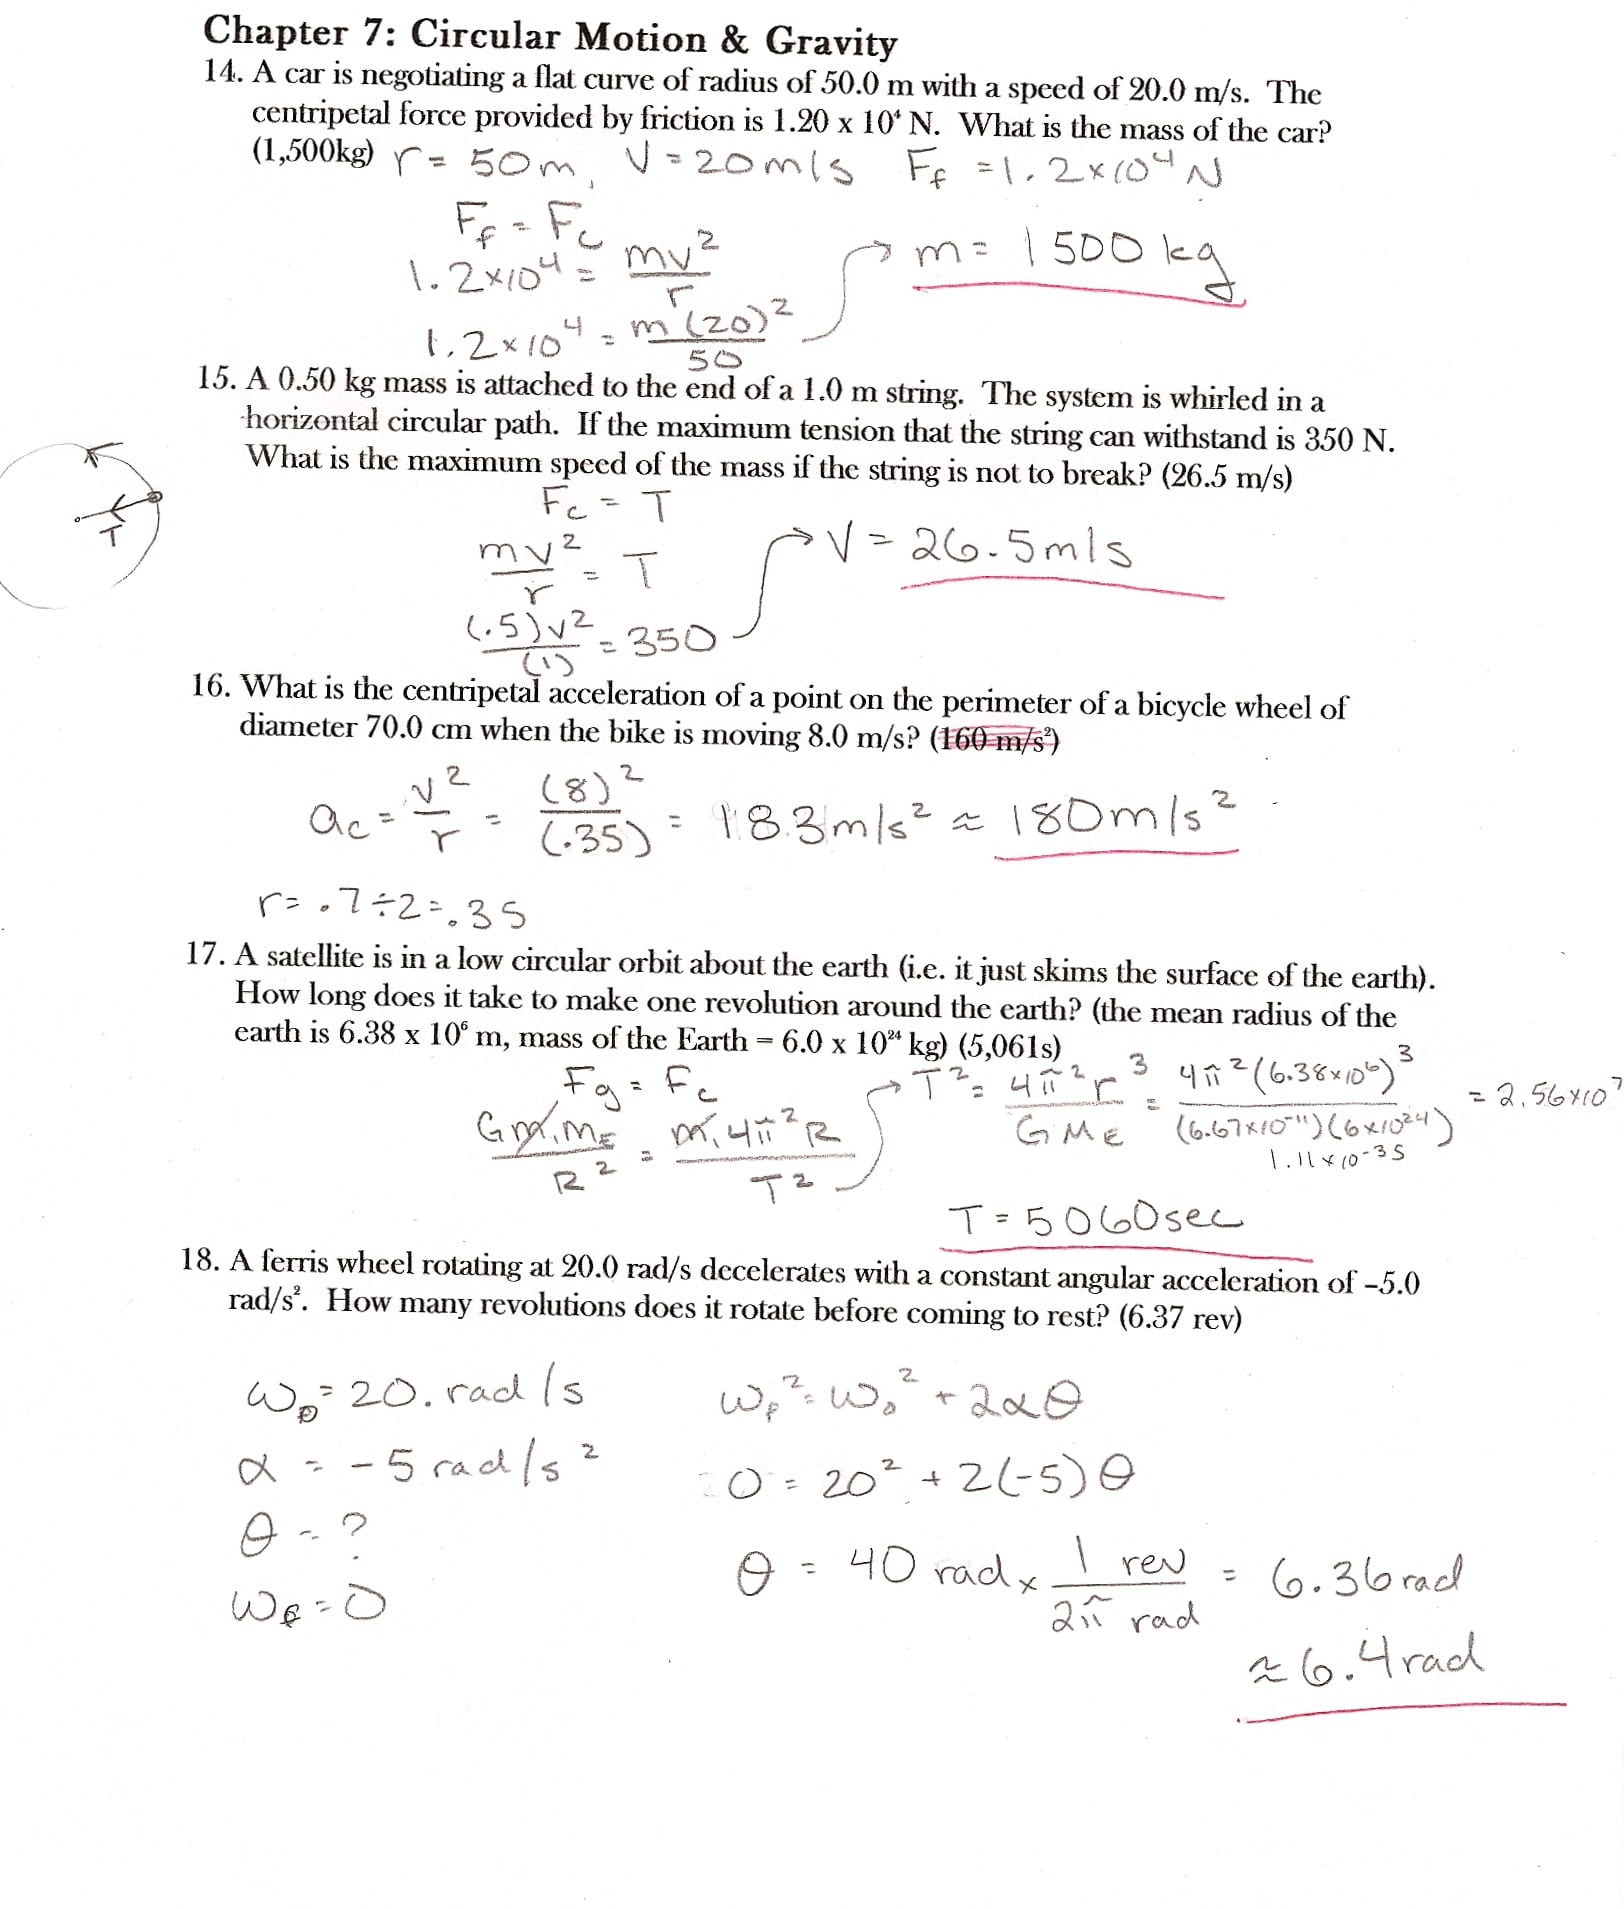 acceleration-worksheet-pdf-answers-free-download-gambr-co